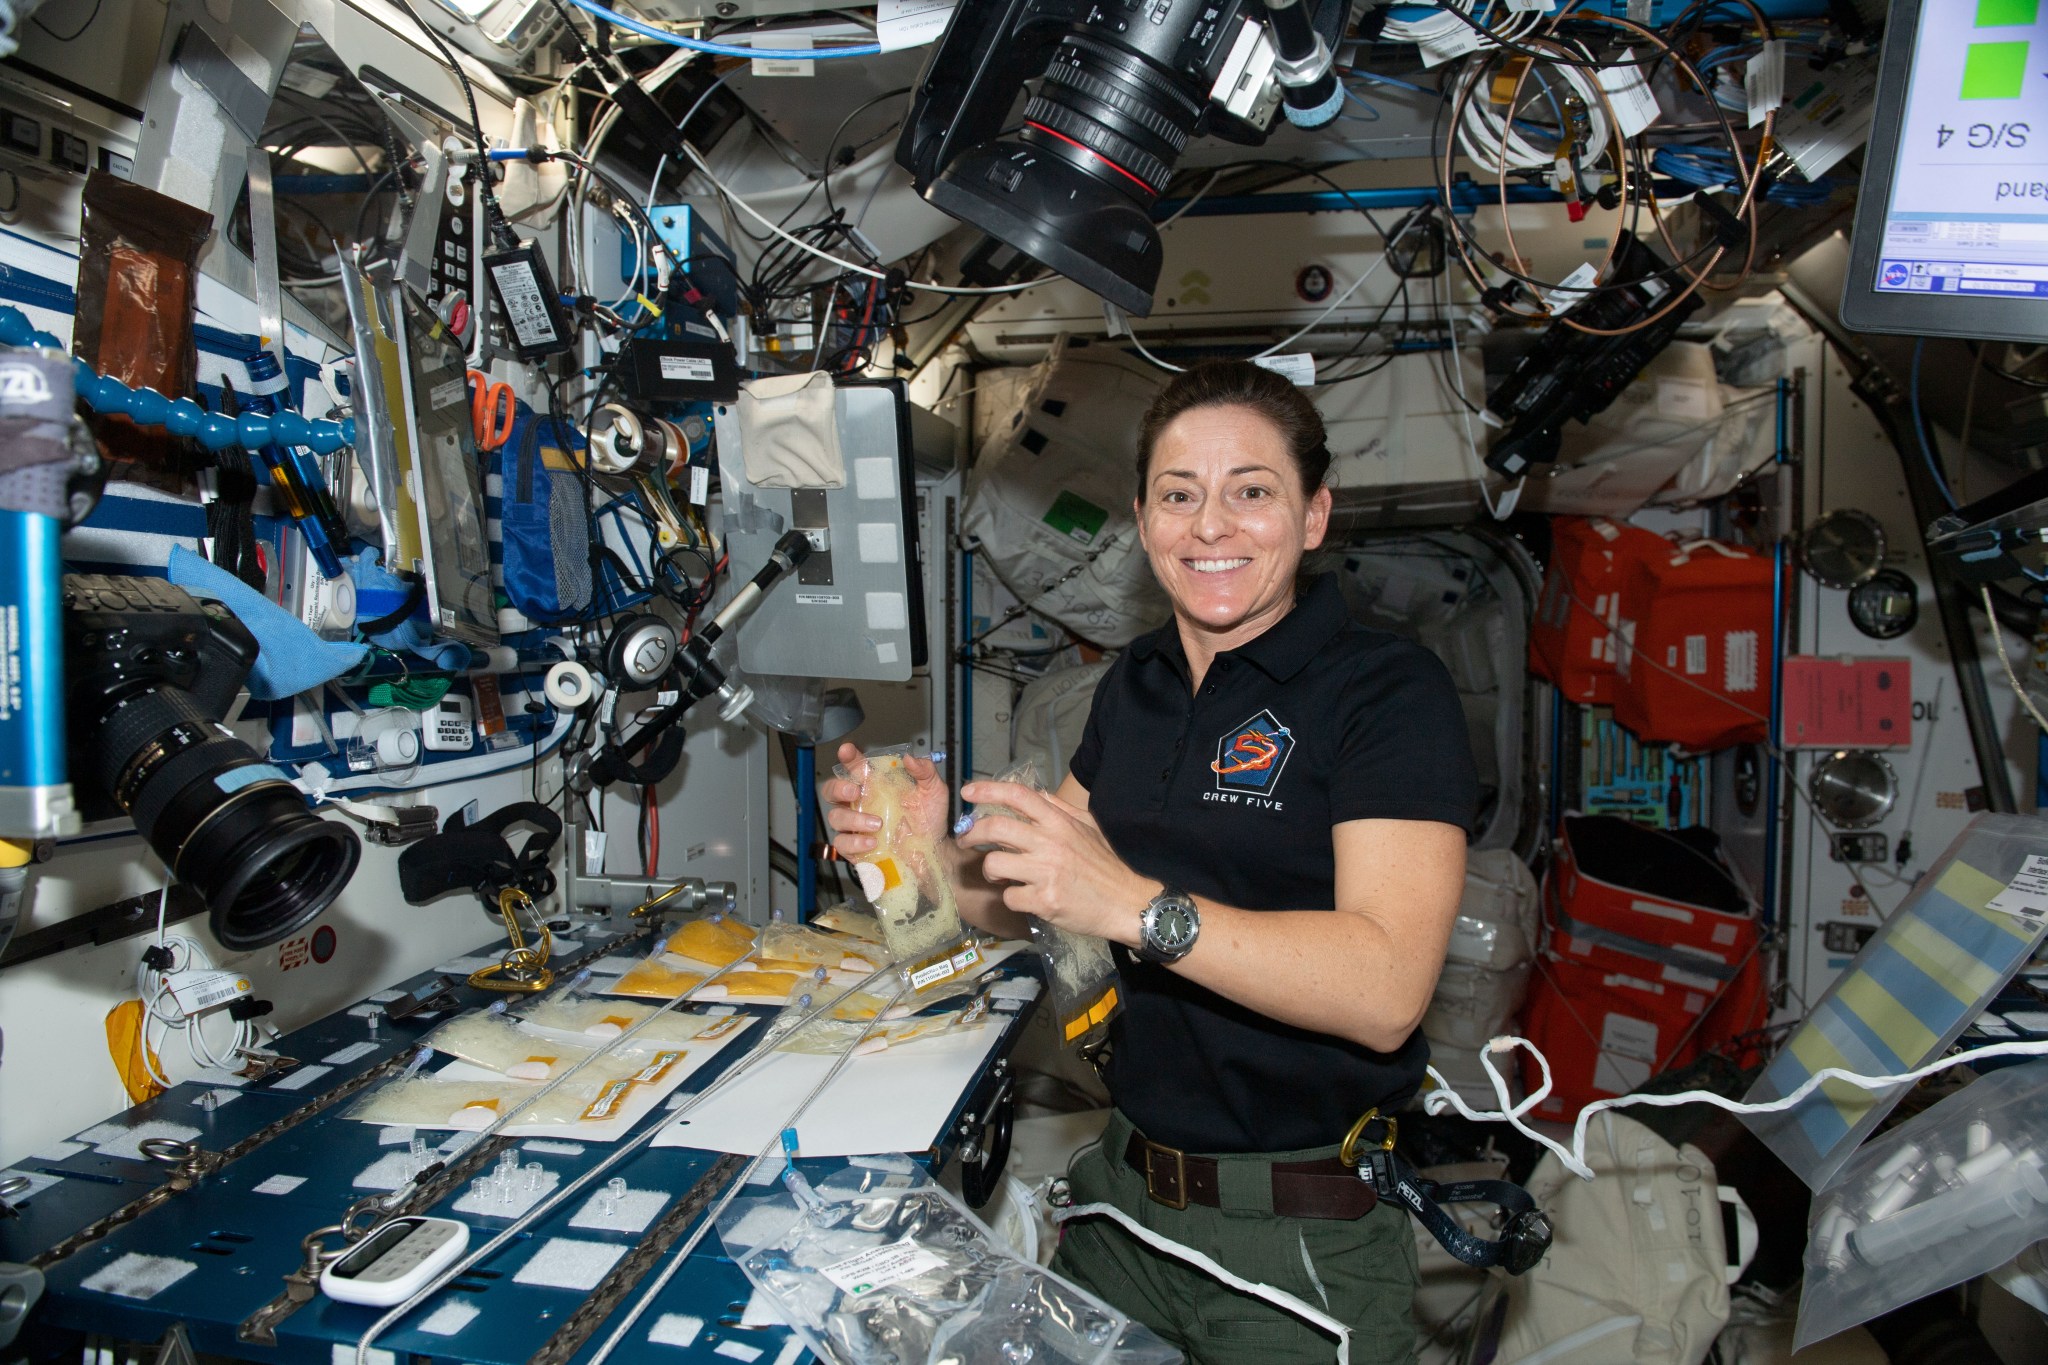 iss068e036727 (Jan. 3, 2023) --- NASA astronaut and Expedition 68 Flight Engineer Nicole Mann works in the International Space Station's Harmony module on the BioNutrients-2 investigation that uses genetically engineered microbes to provide nutrients, and potentially other compounds and pharmaceuticals, on demand in space.